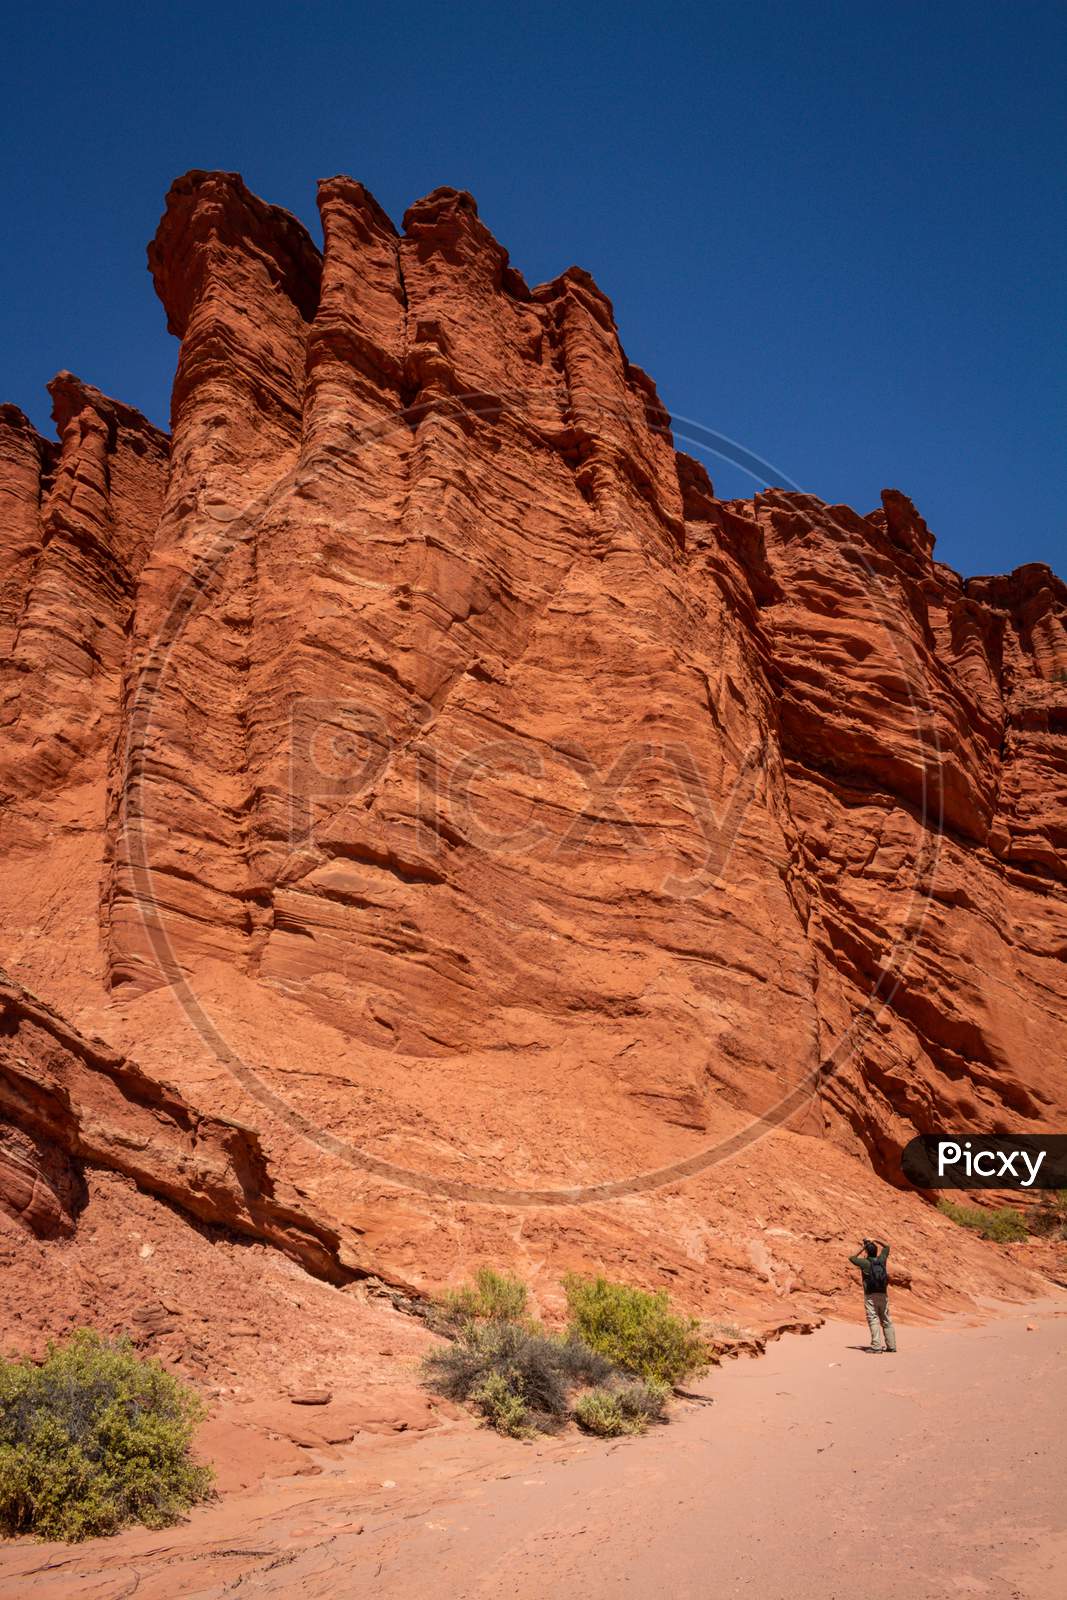 Backpacker Man Taking Photos Of The Geological Formations In The Talampaya National Park In The Argentine Republic. Reddish Rocks